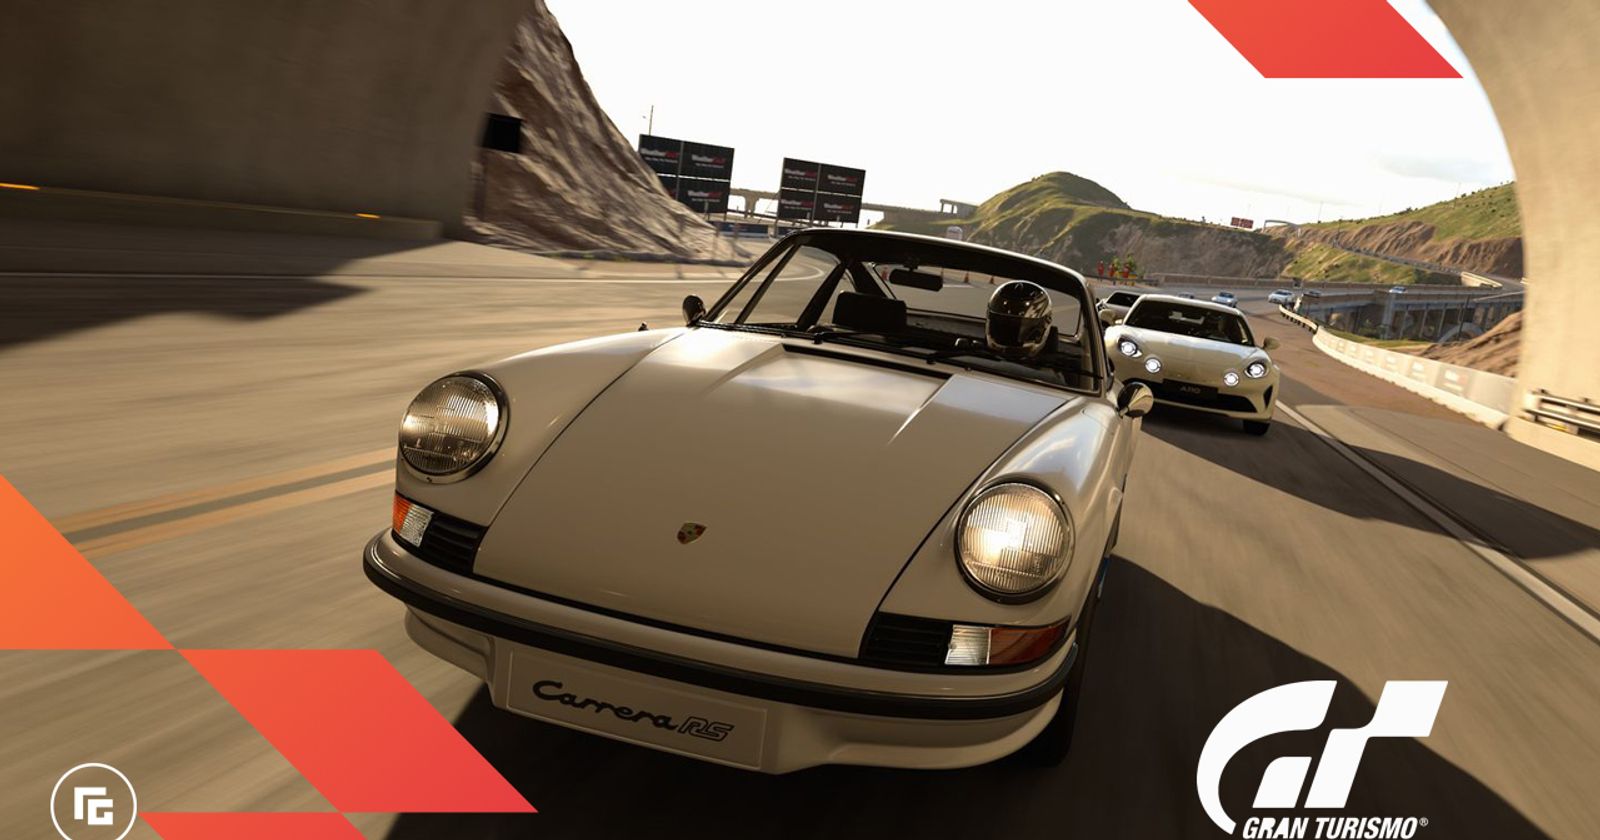 Gran Turismo 7 update 1.29 to include five new cars and a classic track